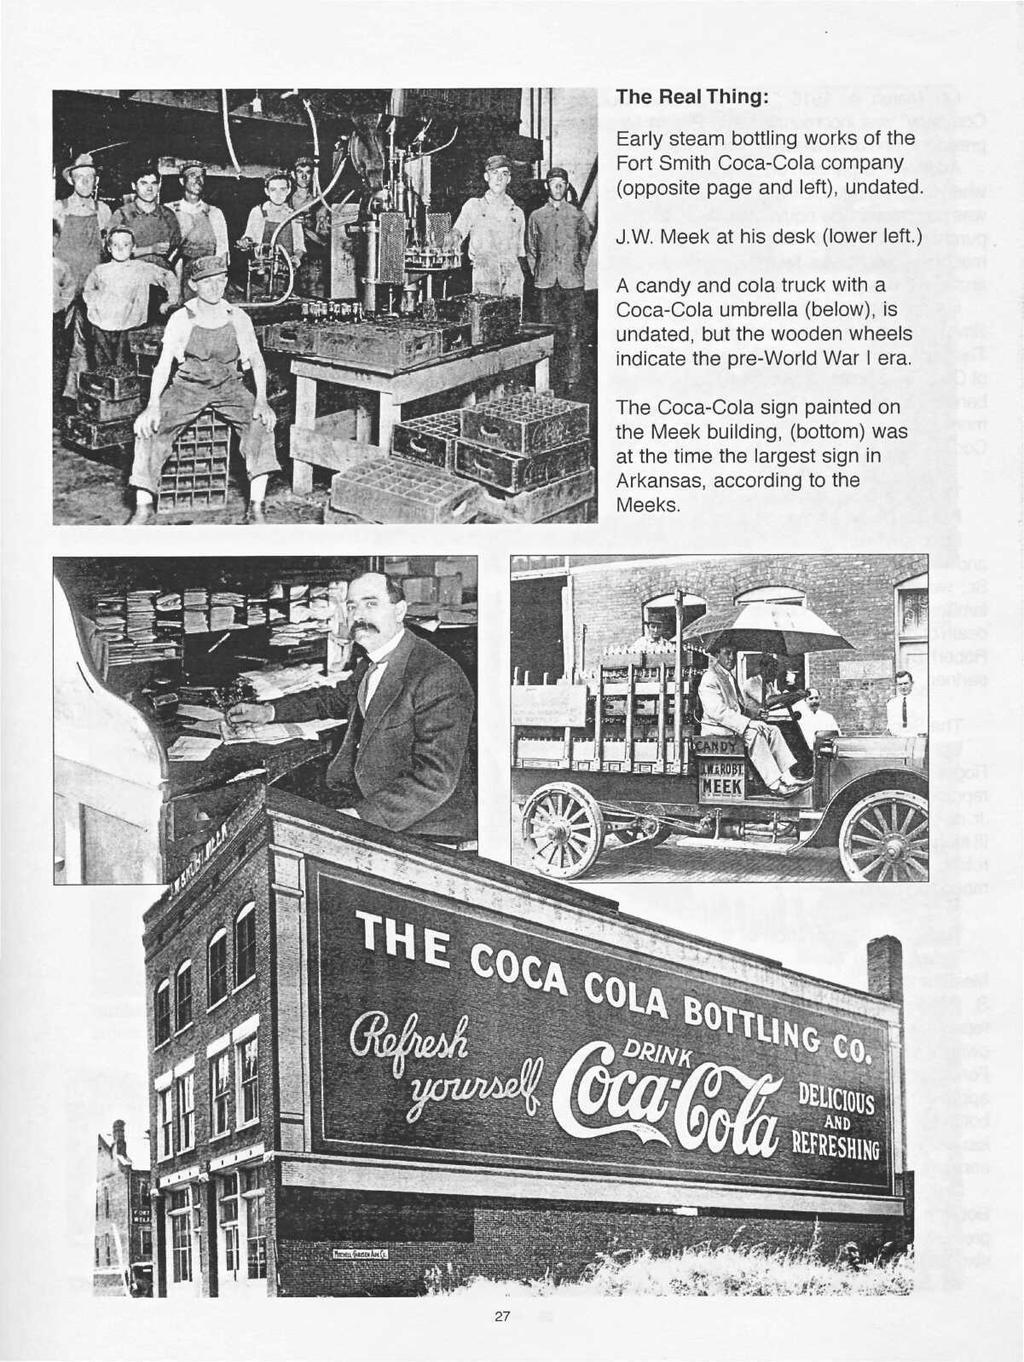 The Real Thing: Early steam bottling works of the Fort Smith Coca-Cola company (opposite page and left), undated. J.W. Meek at his desk (lower left.